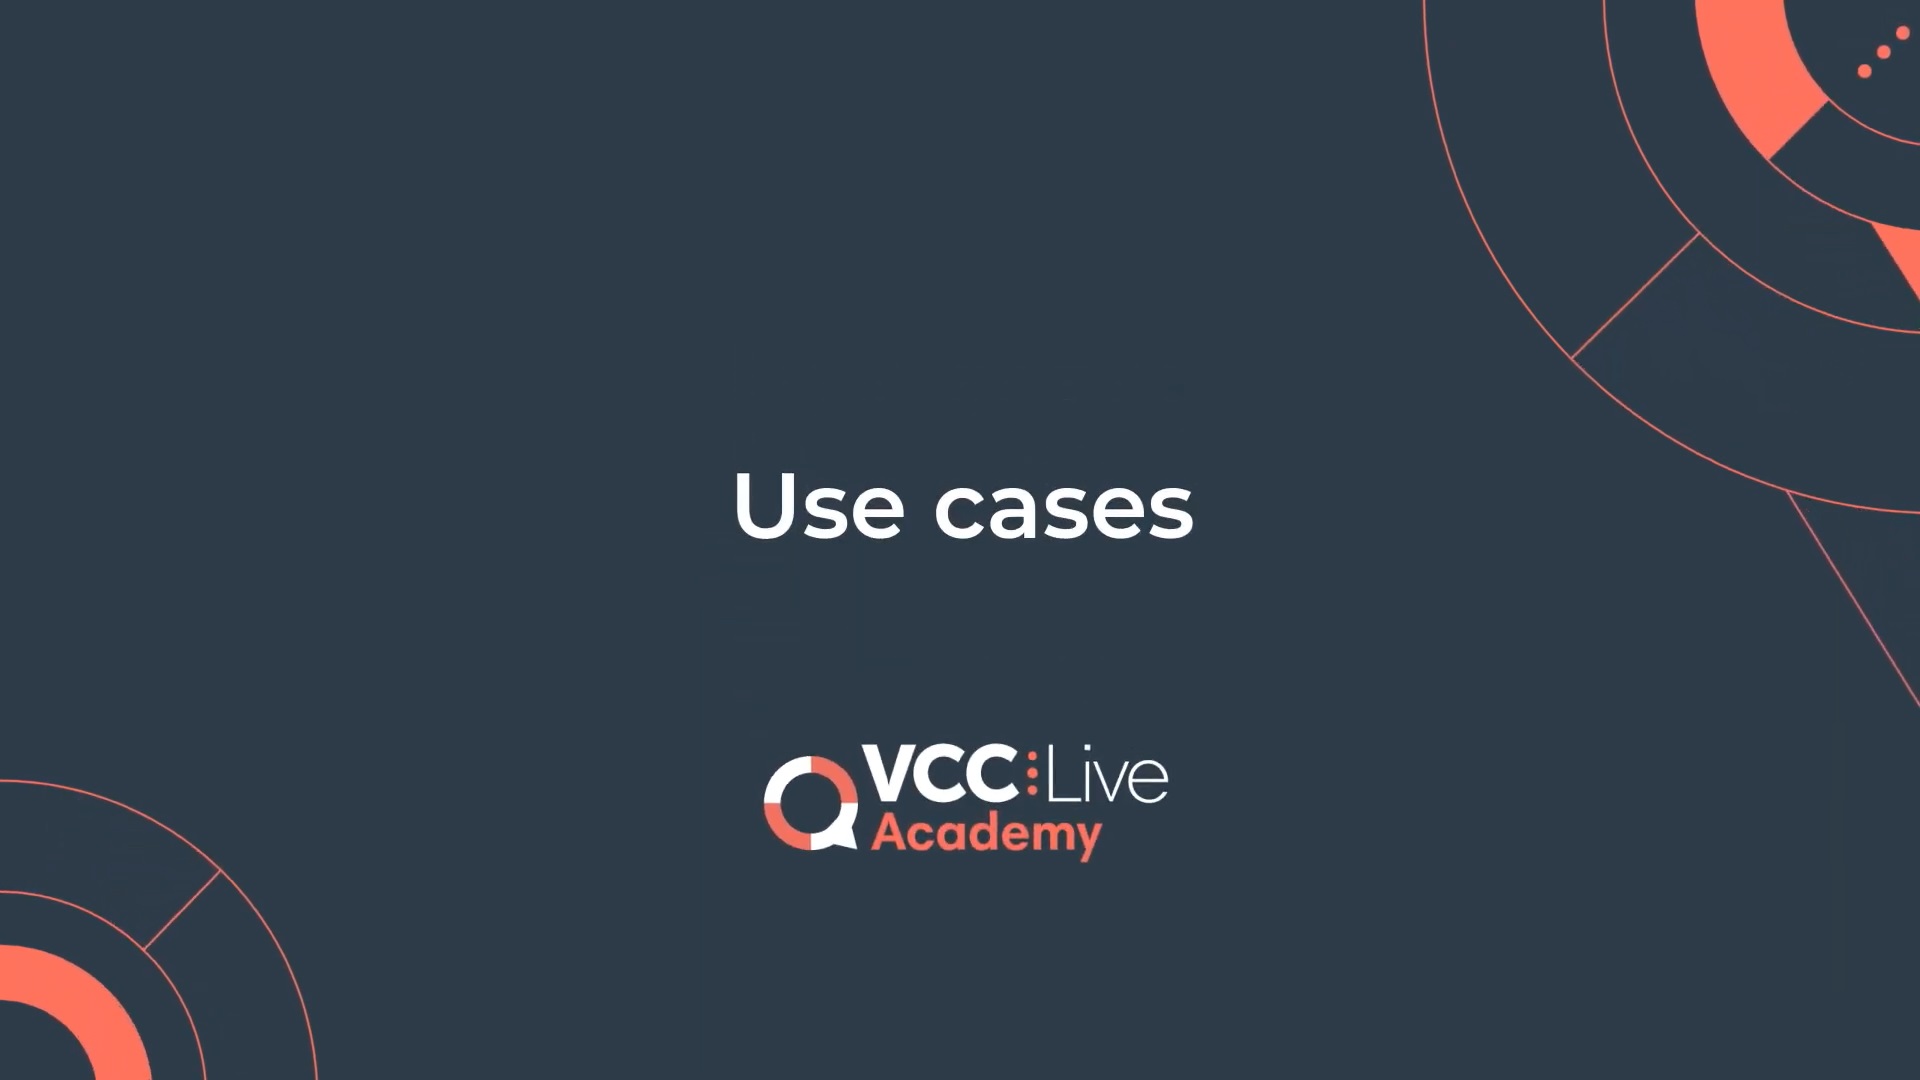 https://vcc.live/wp-content/uploads/2022/08/dialer-course-use-cases.jpg